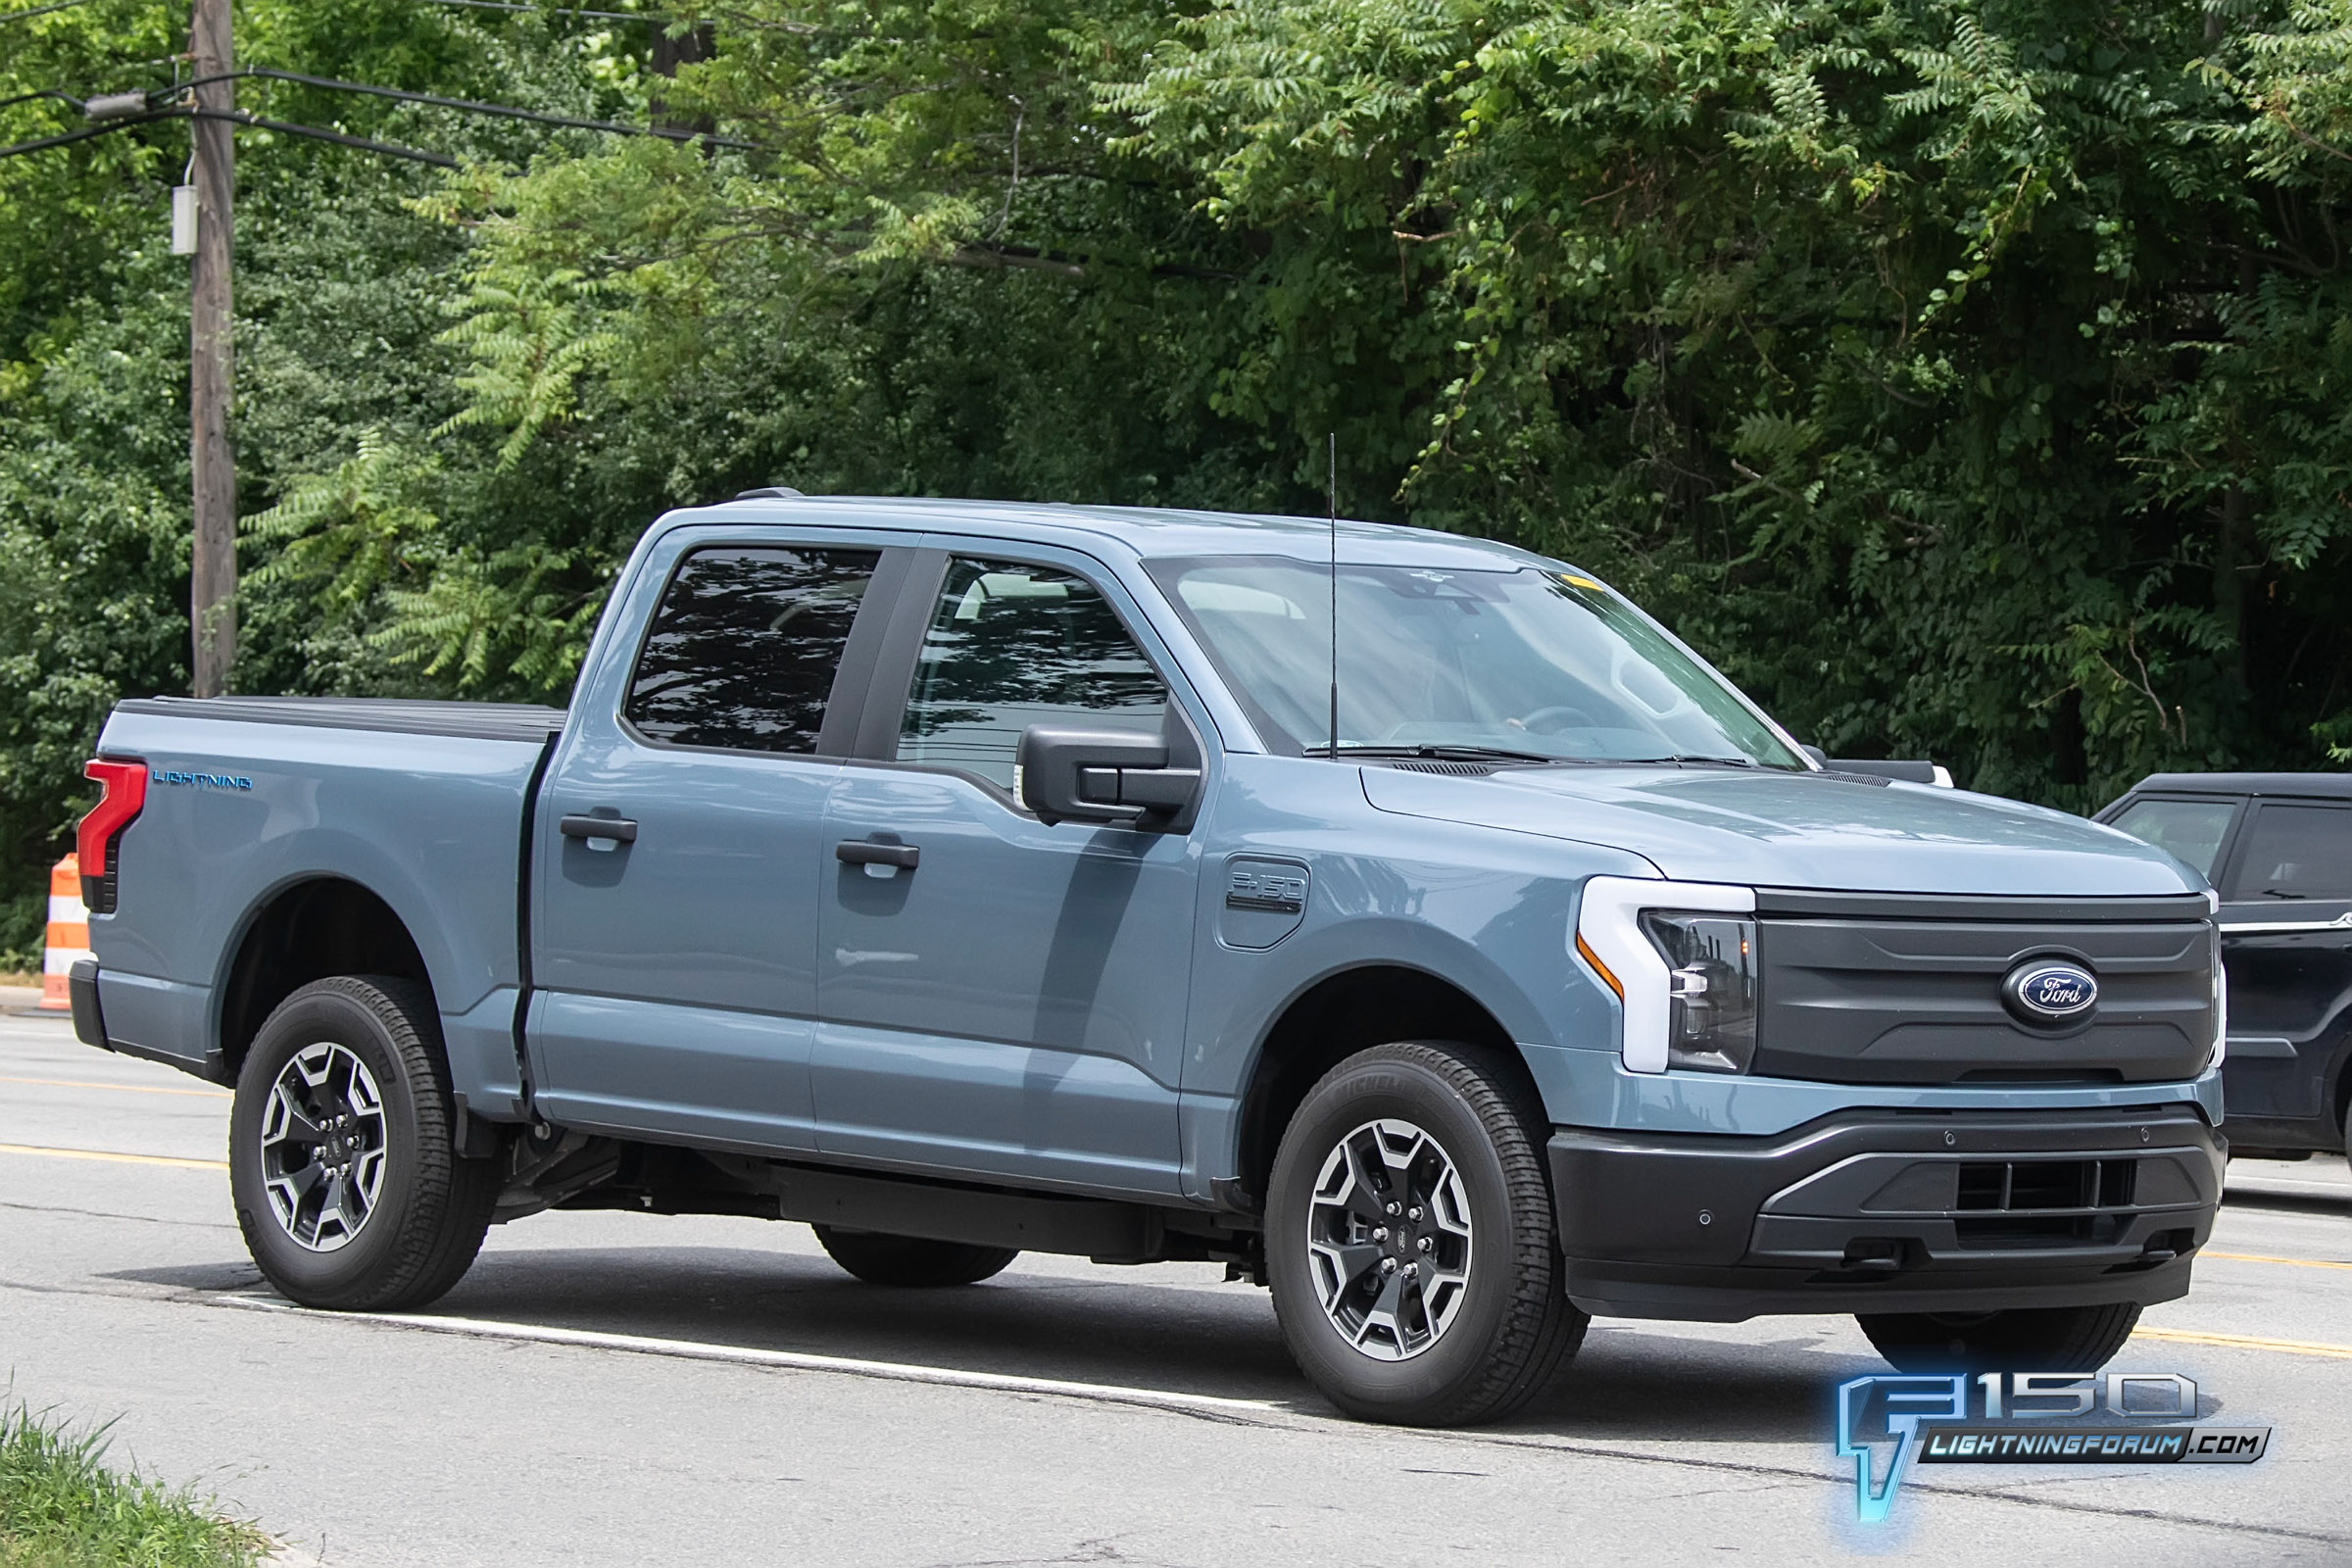 Area 51 Color Spotted! Likely For 2023 F150 Lightning Ford Lightning